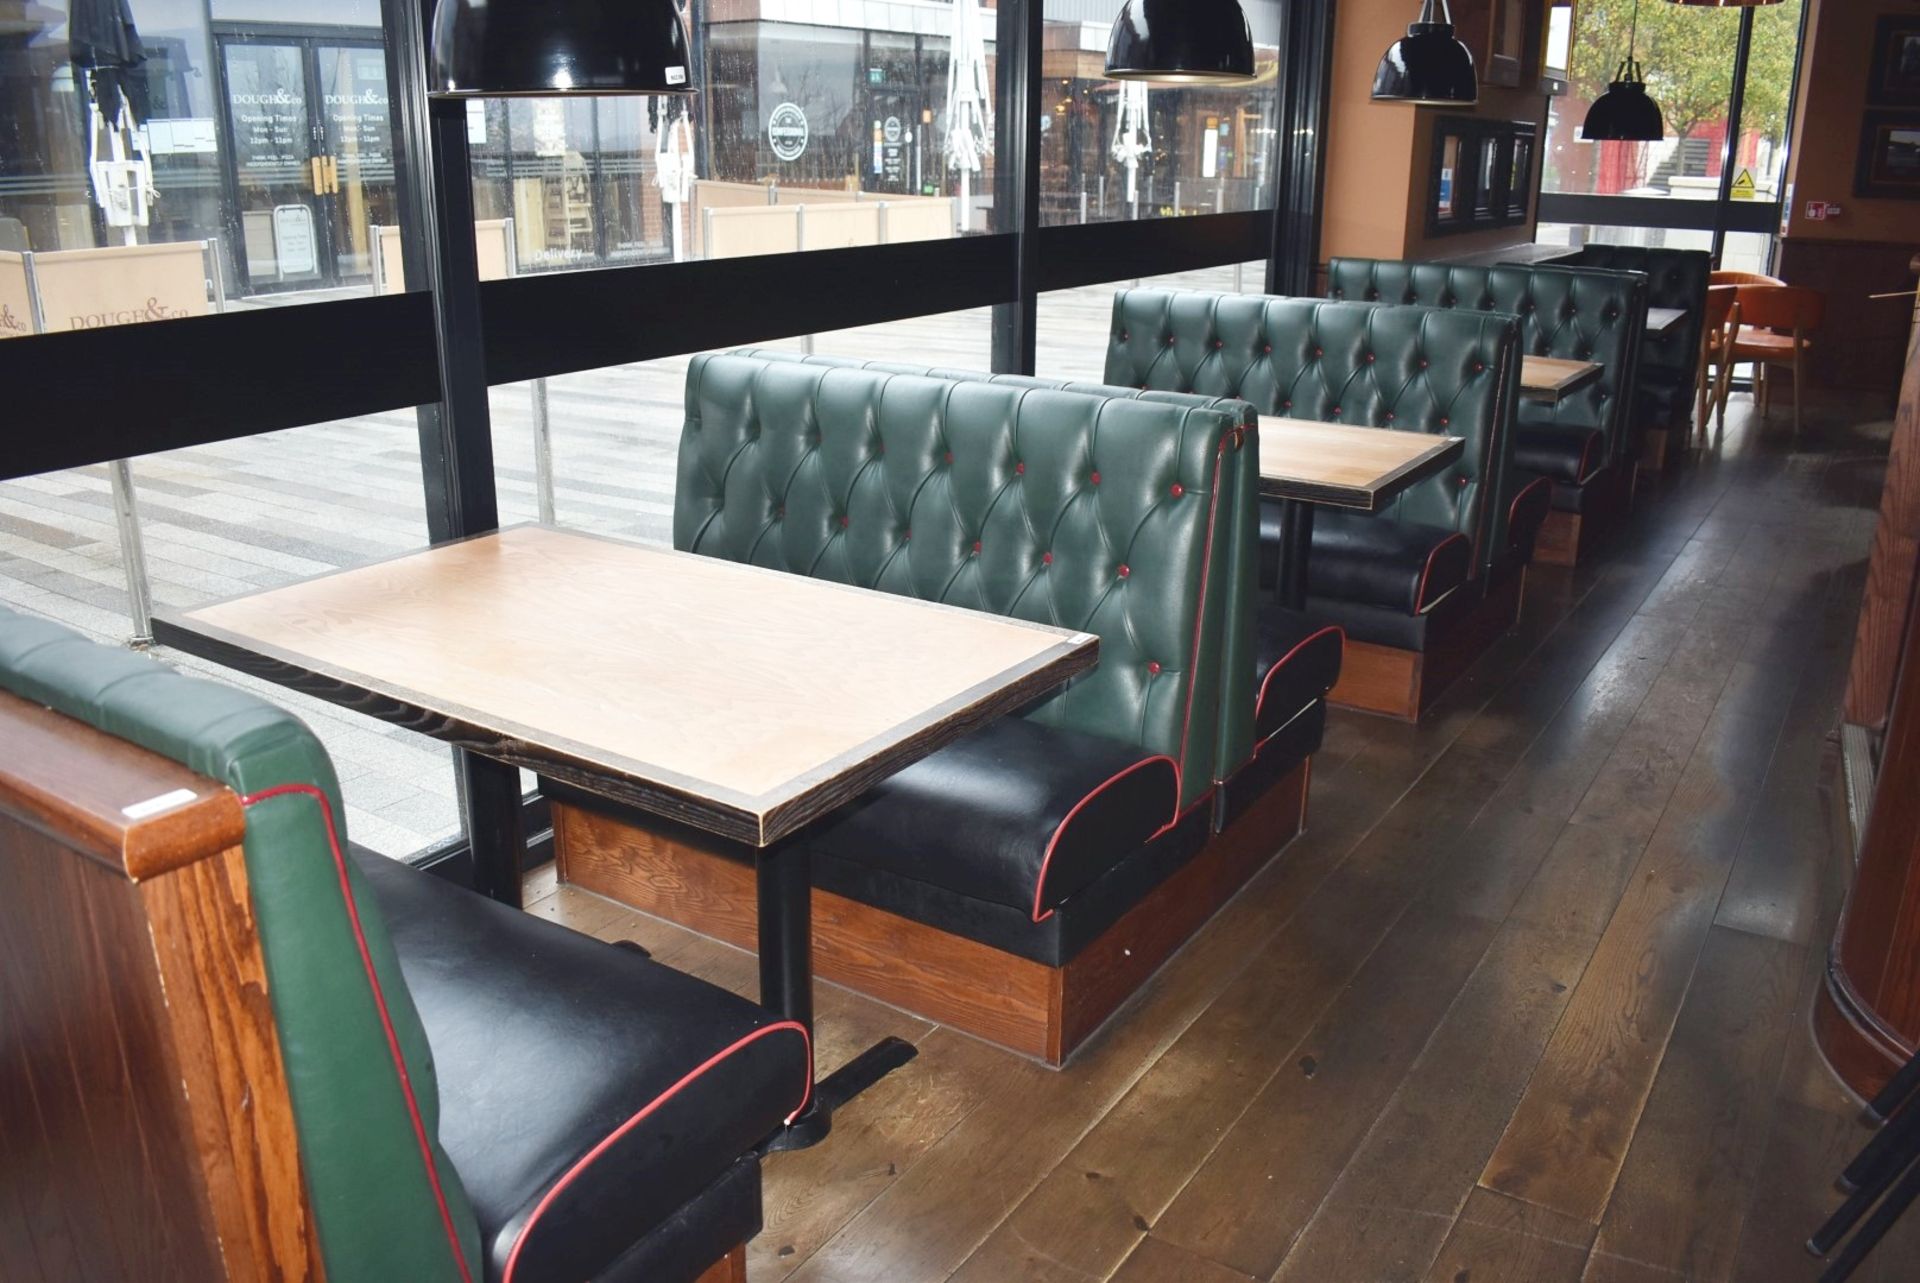 4 x Sections of Restaurant Double Booth Seating - Sits Up to 12 Persons - Green & Black Upholstery - Image 22 of 24